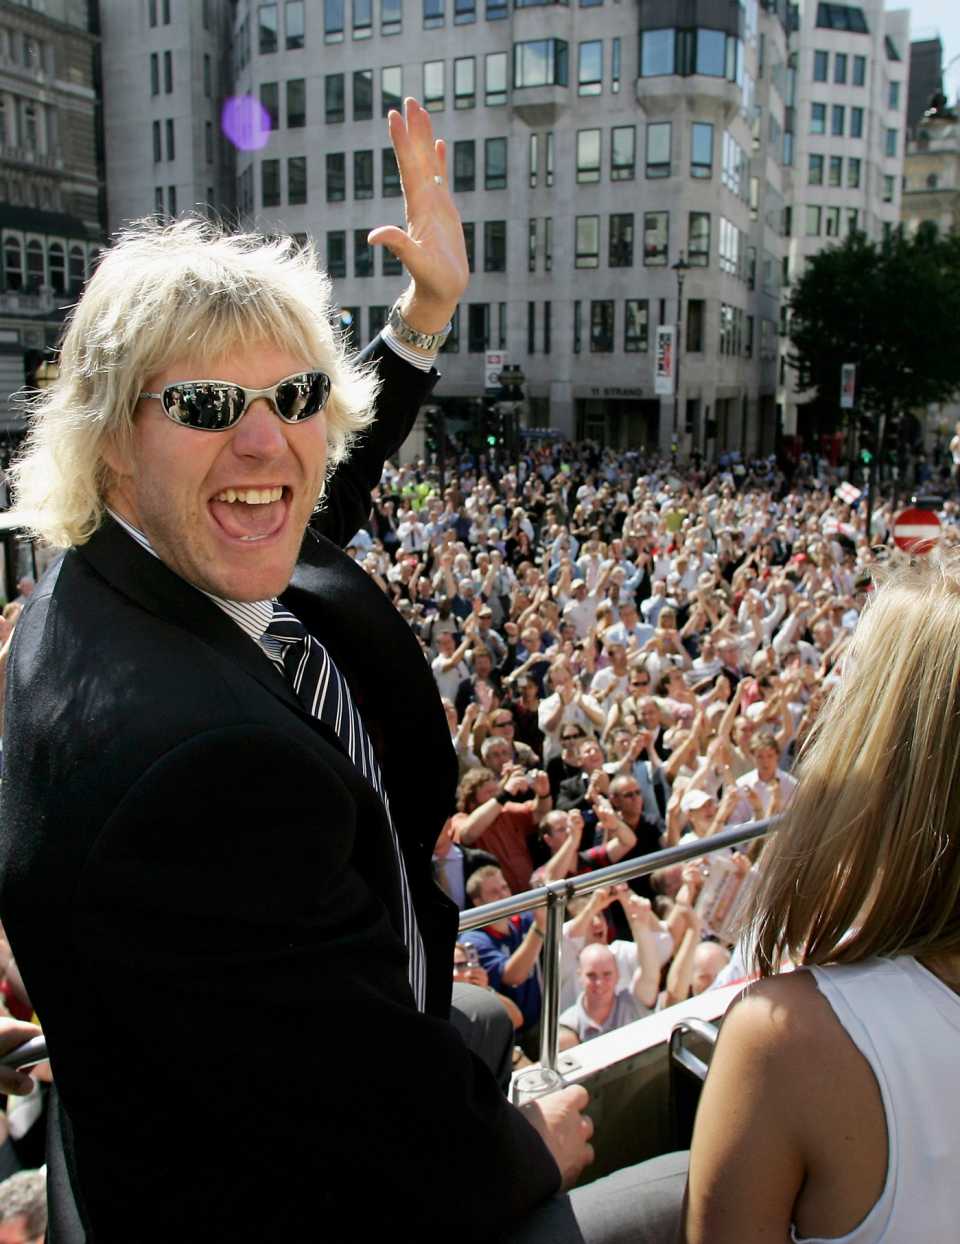 Matthew Hoggard waves to the crowd during the Ashes celebrations, London,  September 13, 2005